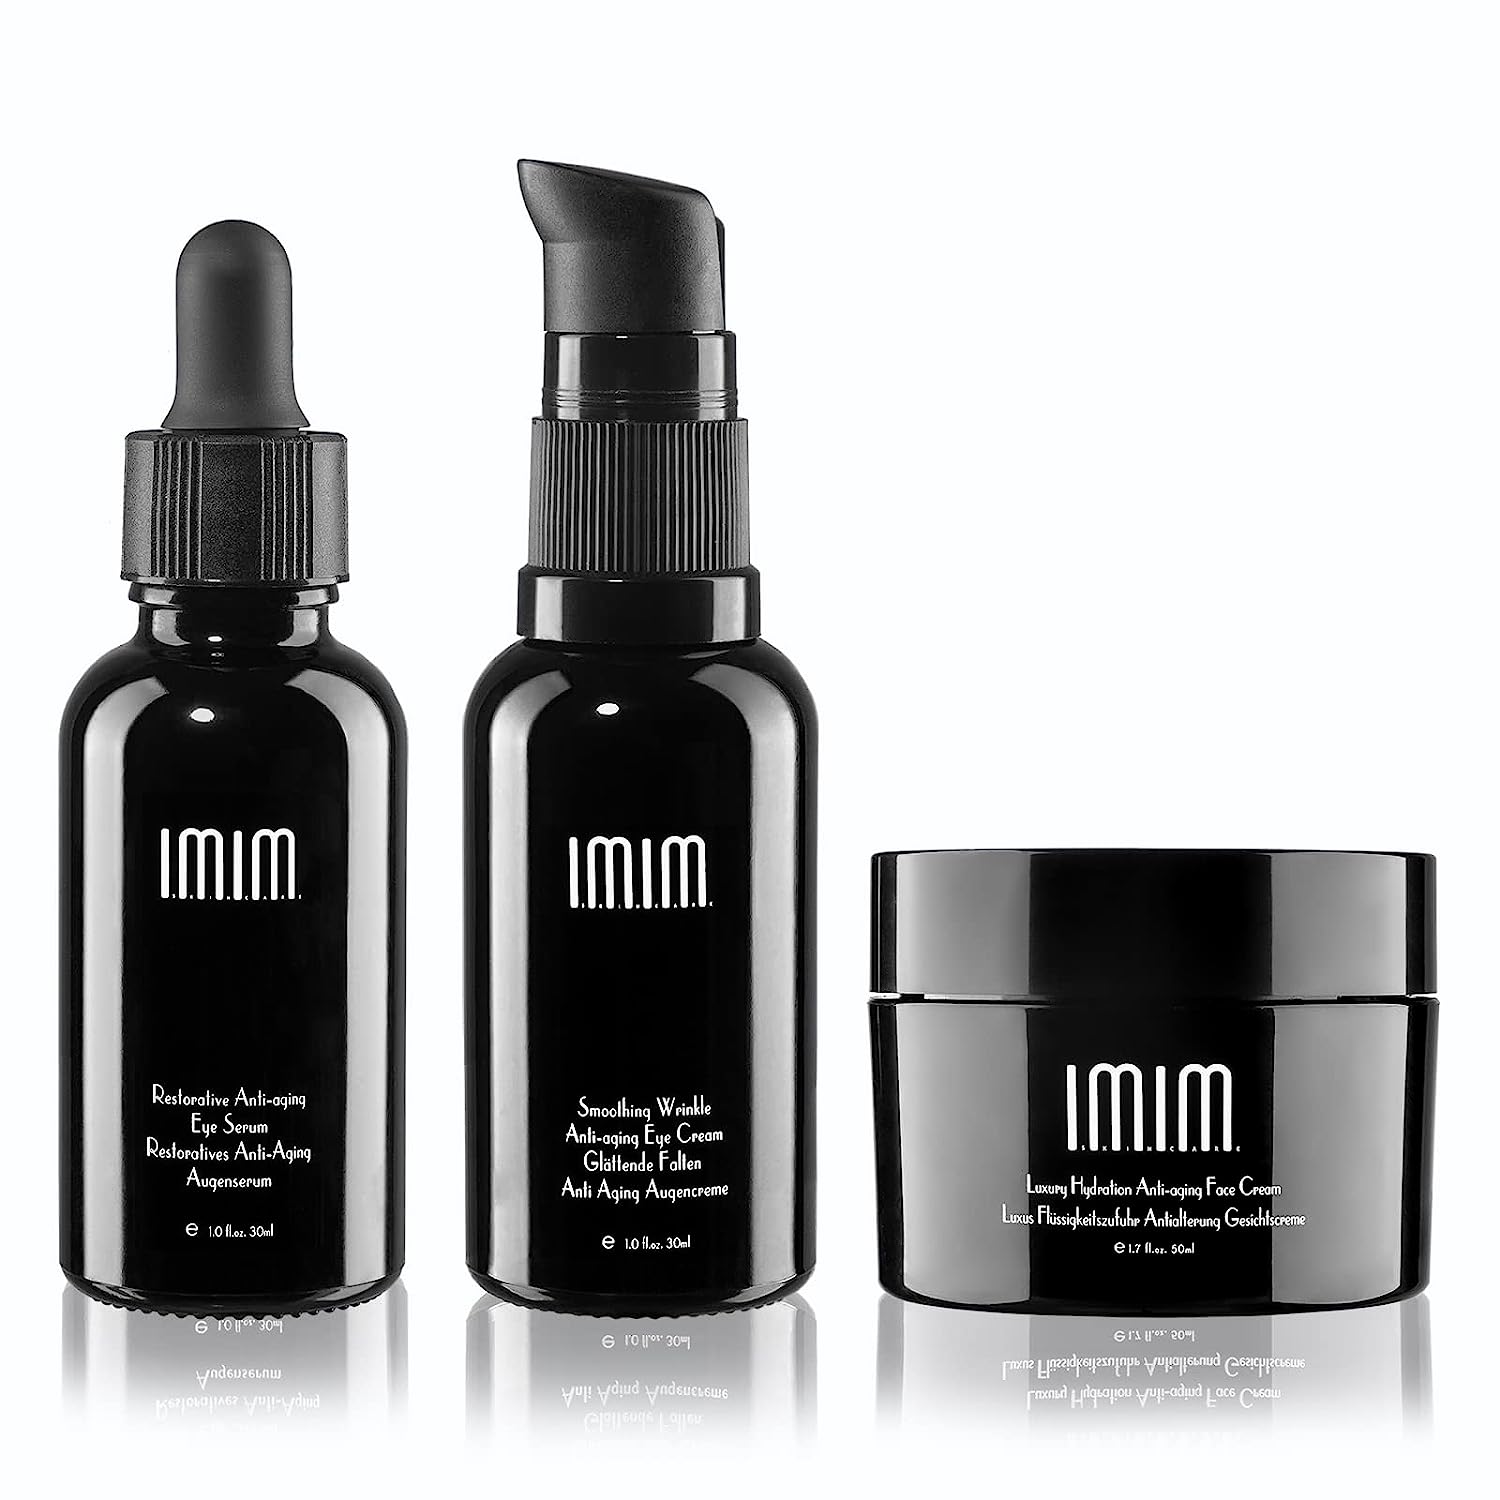 Imim gift set Women with face cream eye cream eye serum skincare set anti-aging anti-agle care care set with Women with hyaluronic acid peptides face care care care mother poison